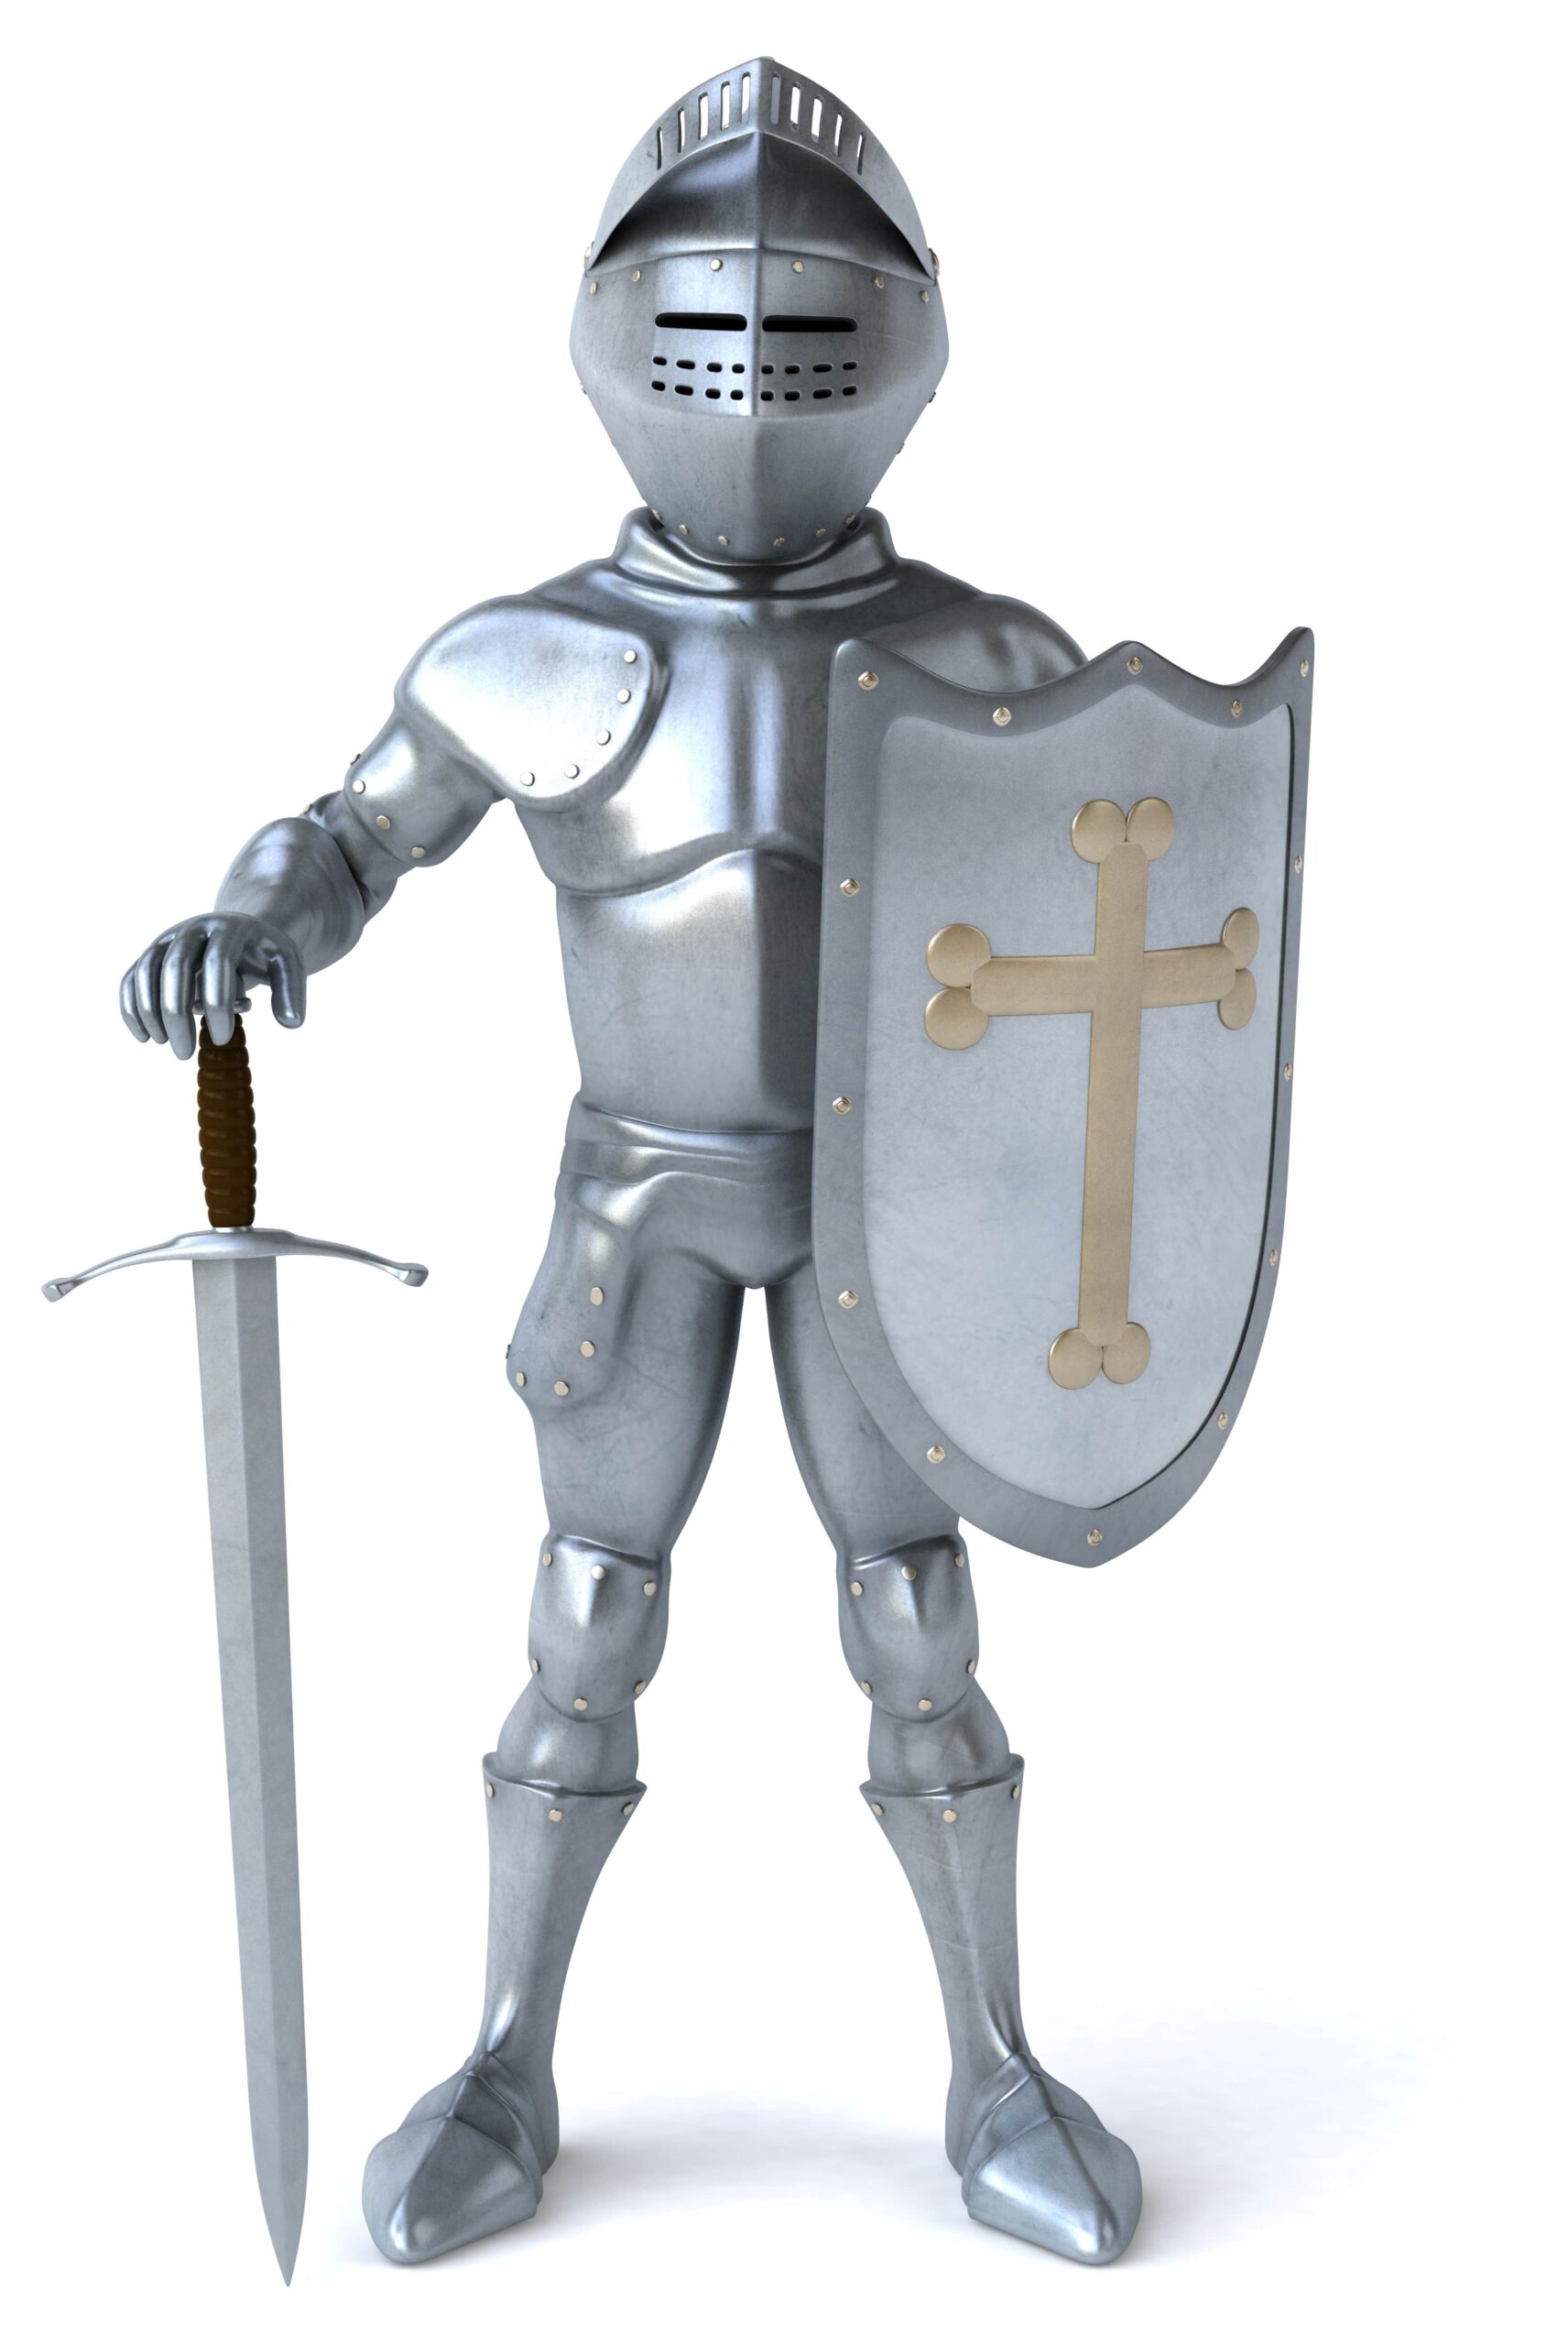 Armour Insurance – You're protected better with Armour